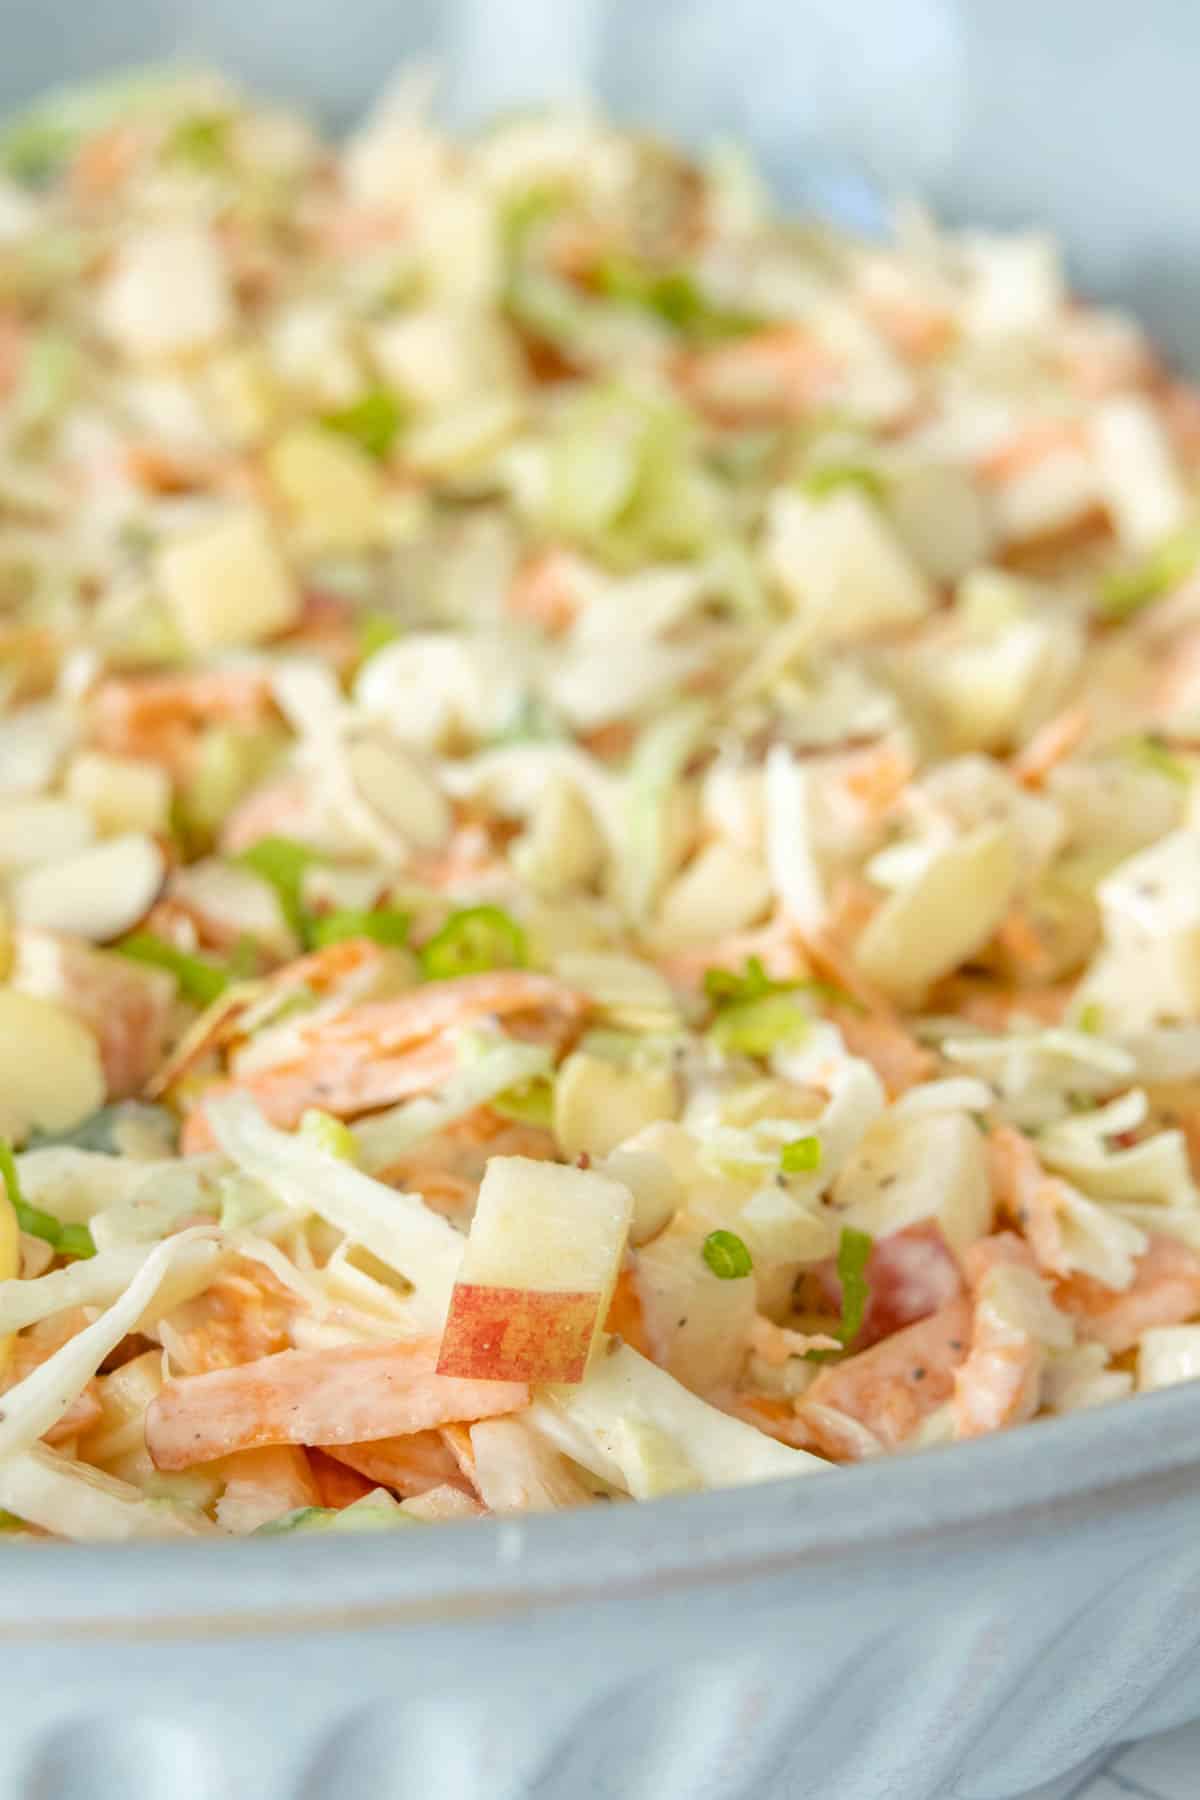 A dish of coleslaw with apples.